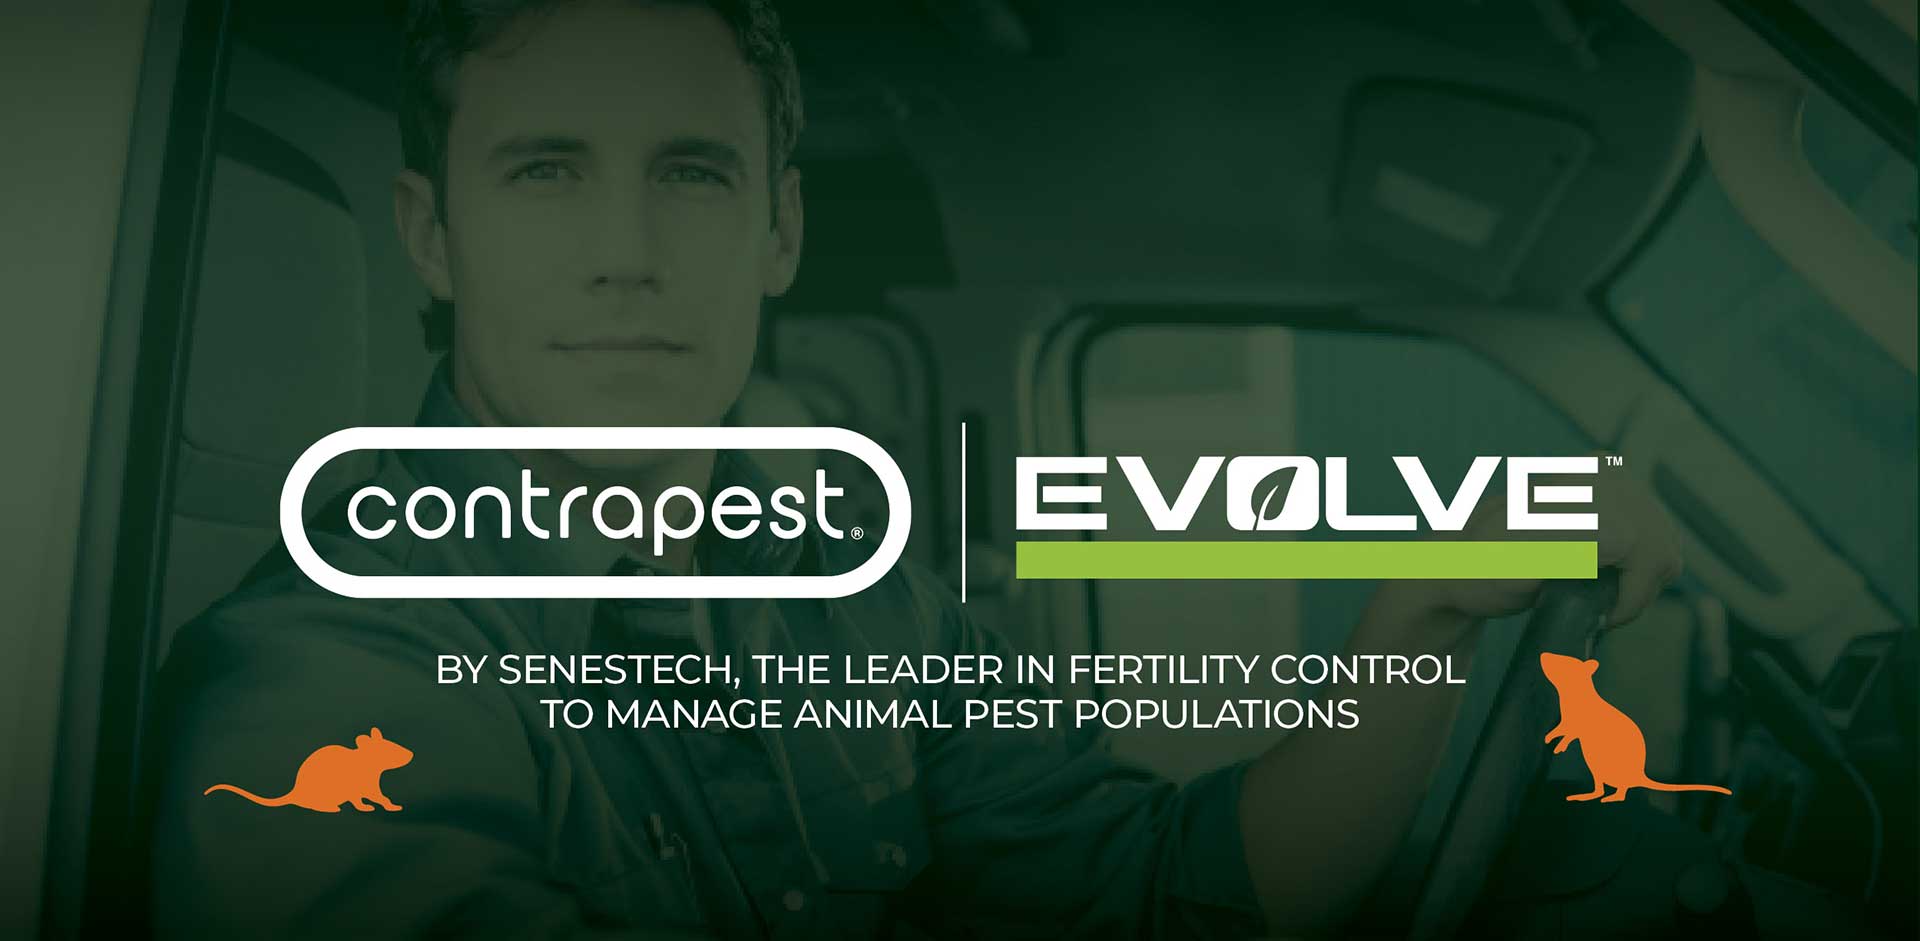 SenesTech - The Leader In Fertility Control to Manage Animal Pest Populations